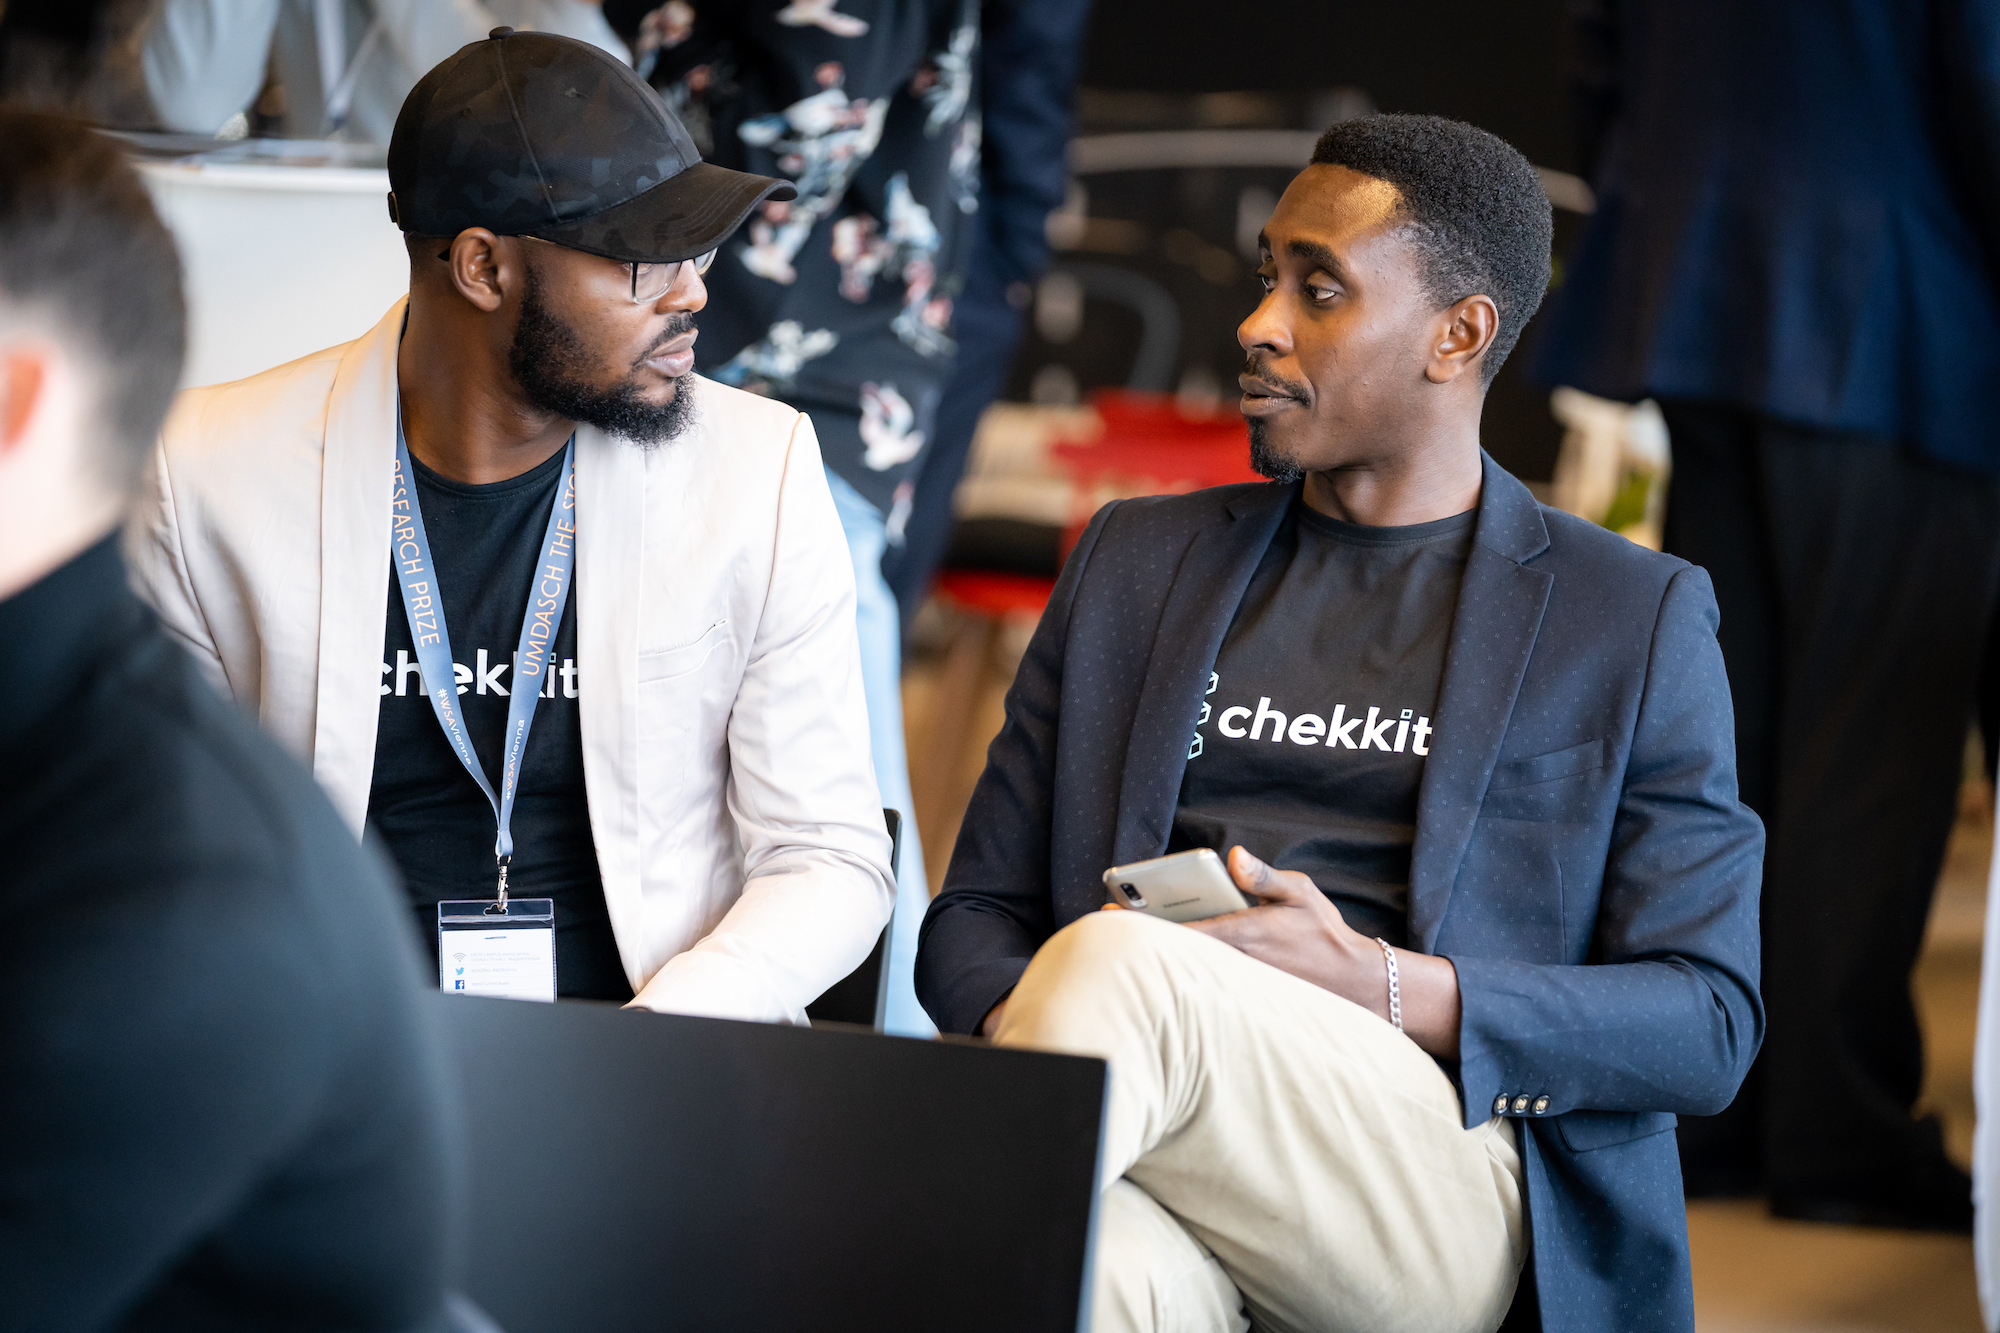 cofounder and founder of Chekkit